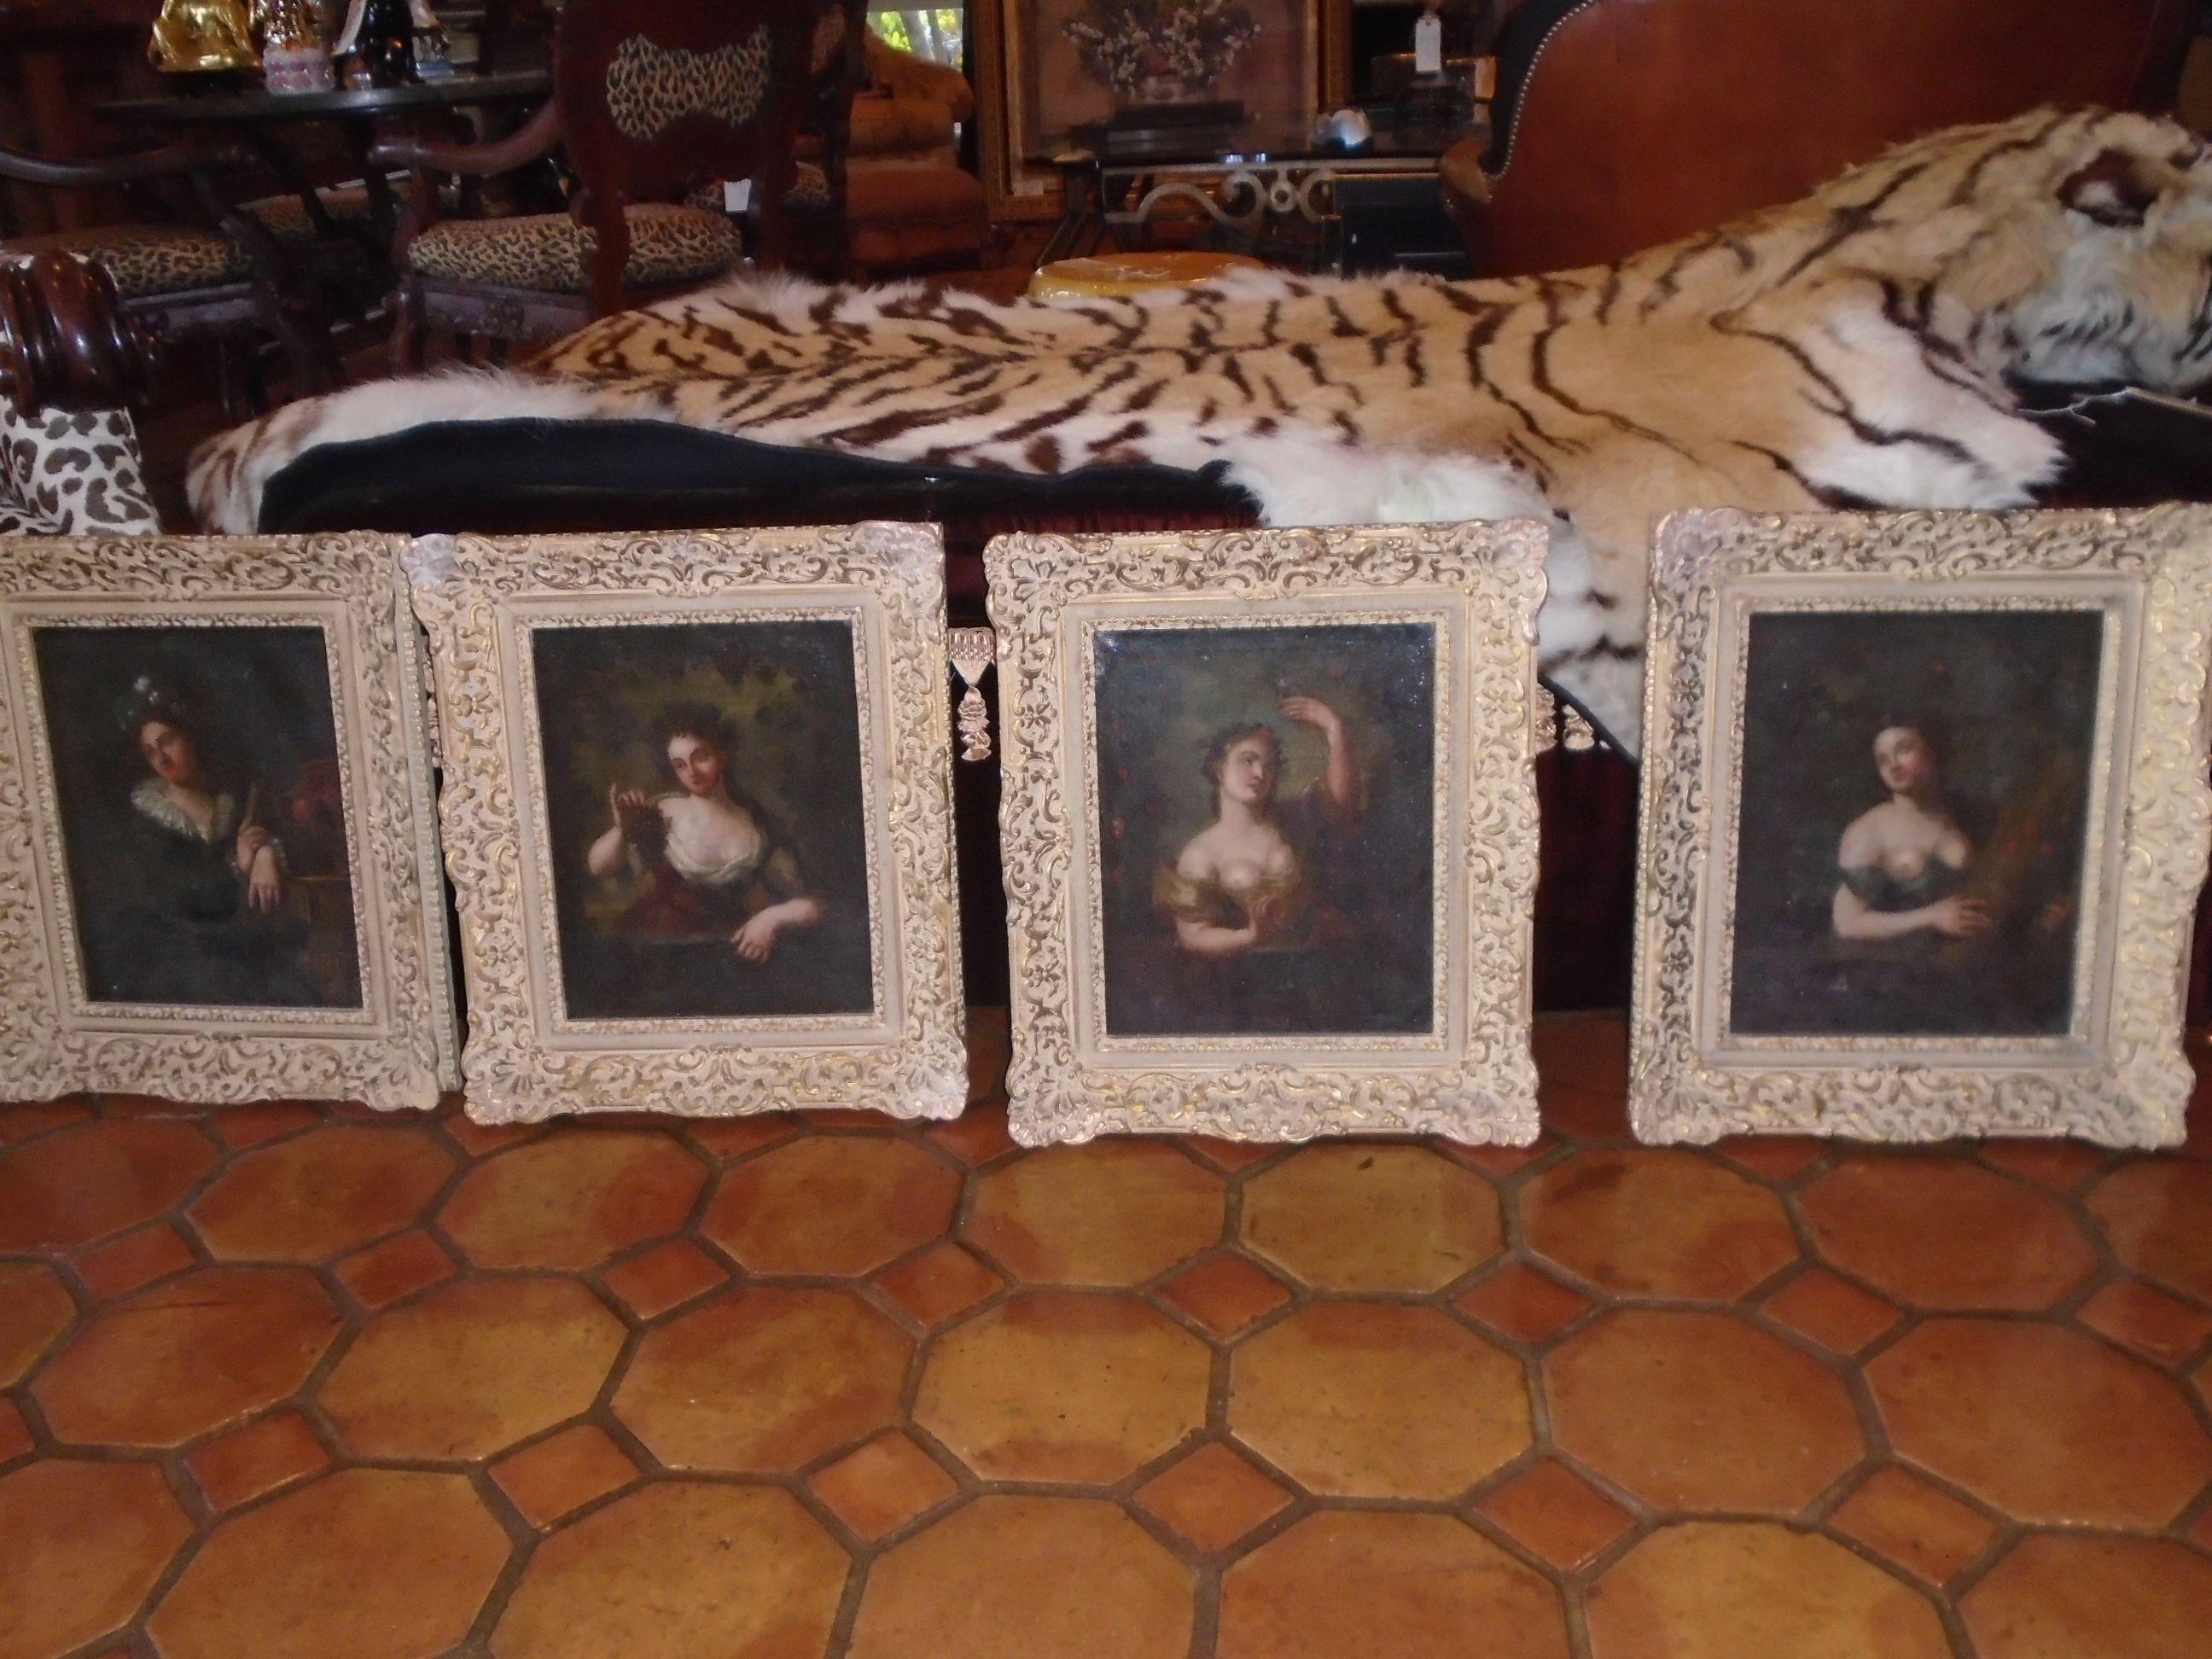 The Four Seasons set of 4 Antique Oil paintings in a gold frame.